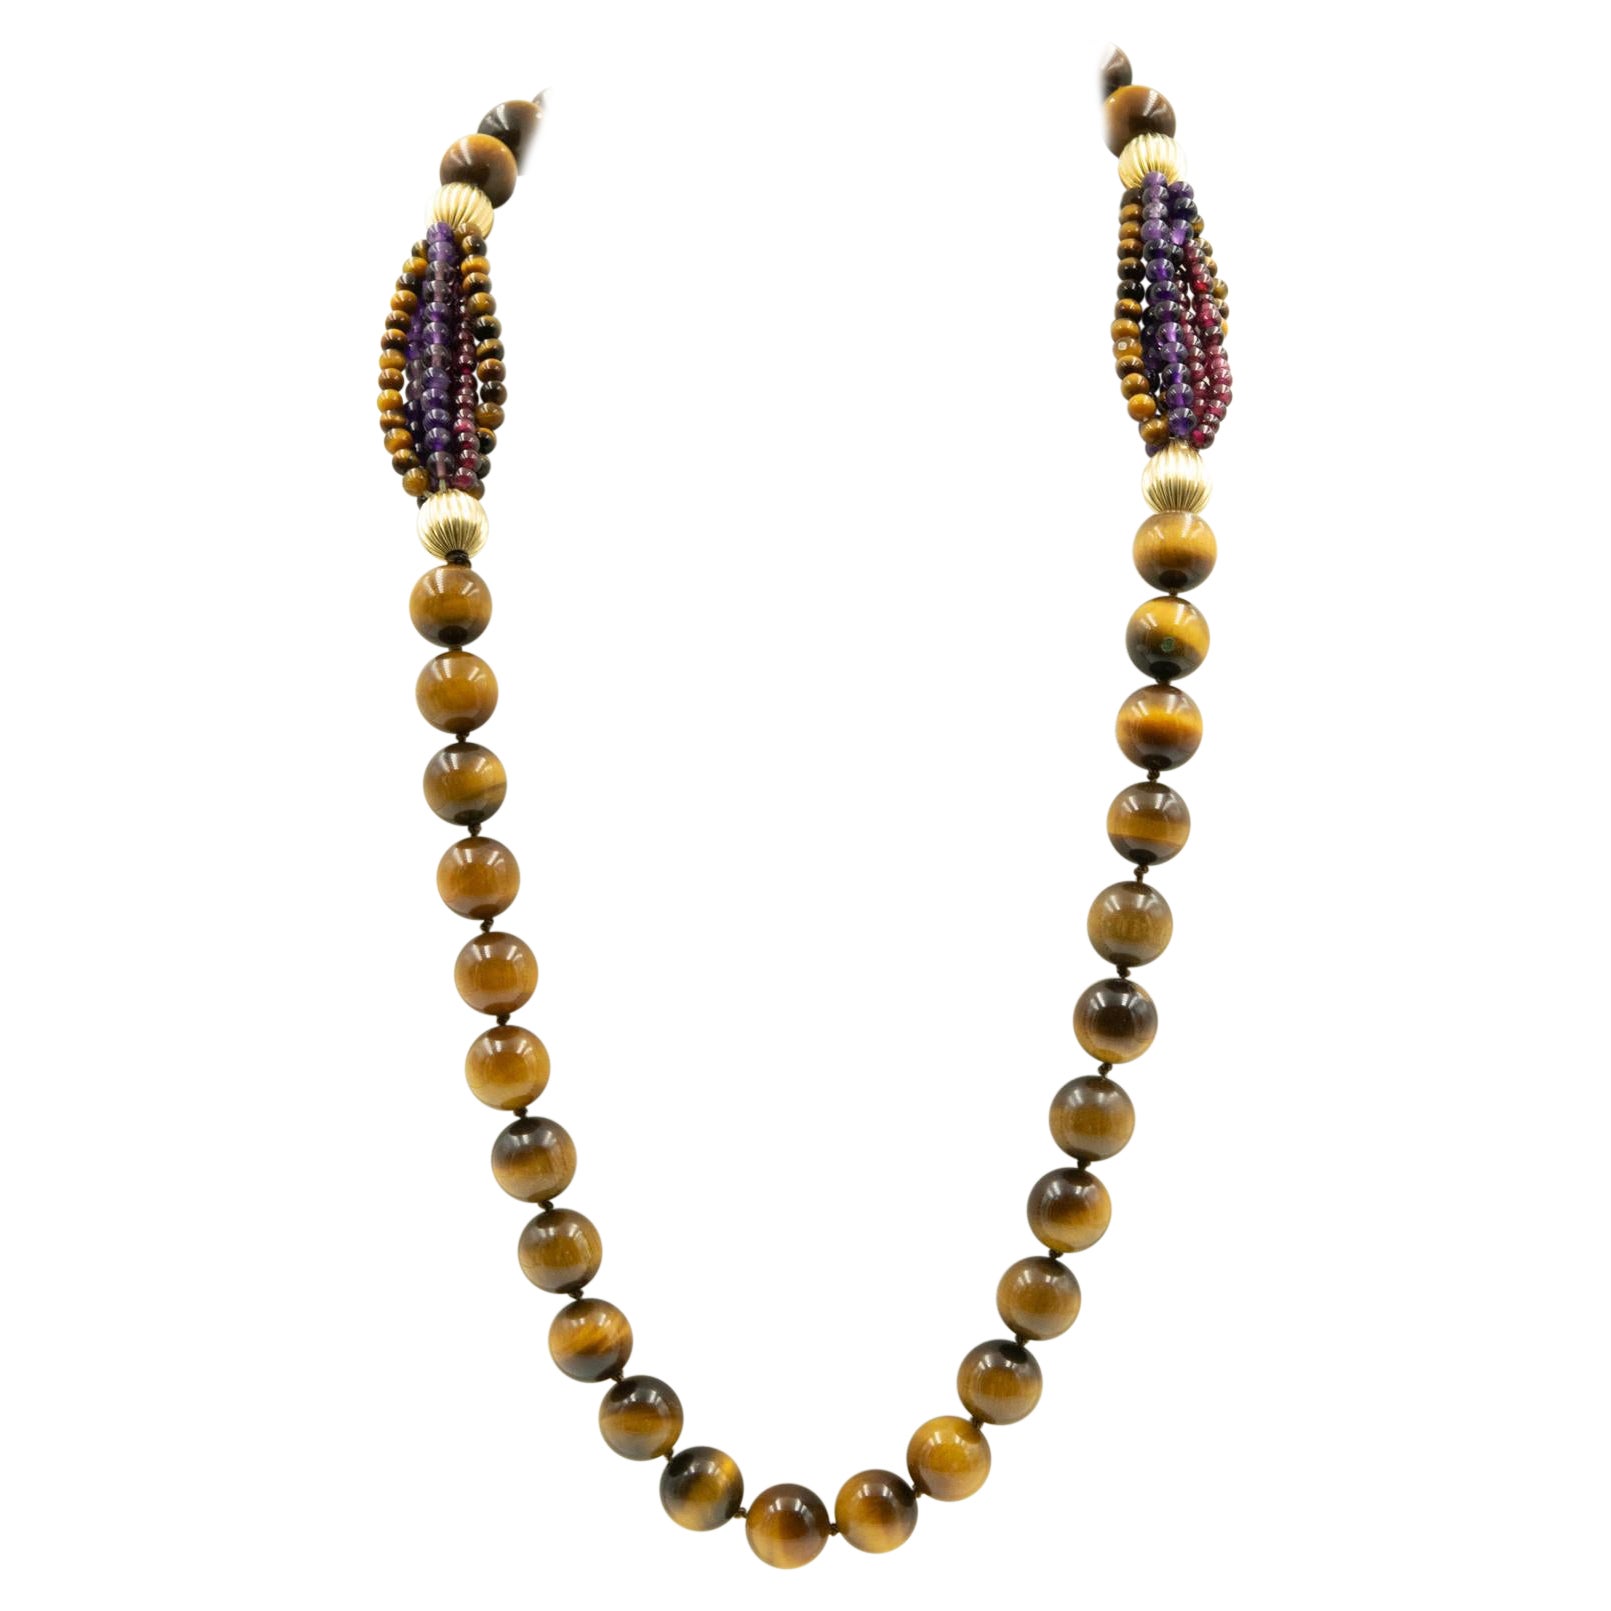 Long Tiger's Eye Amethyst and Garnet Bead Necklace with Gold Filled Ribbed Beads